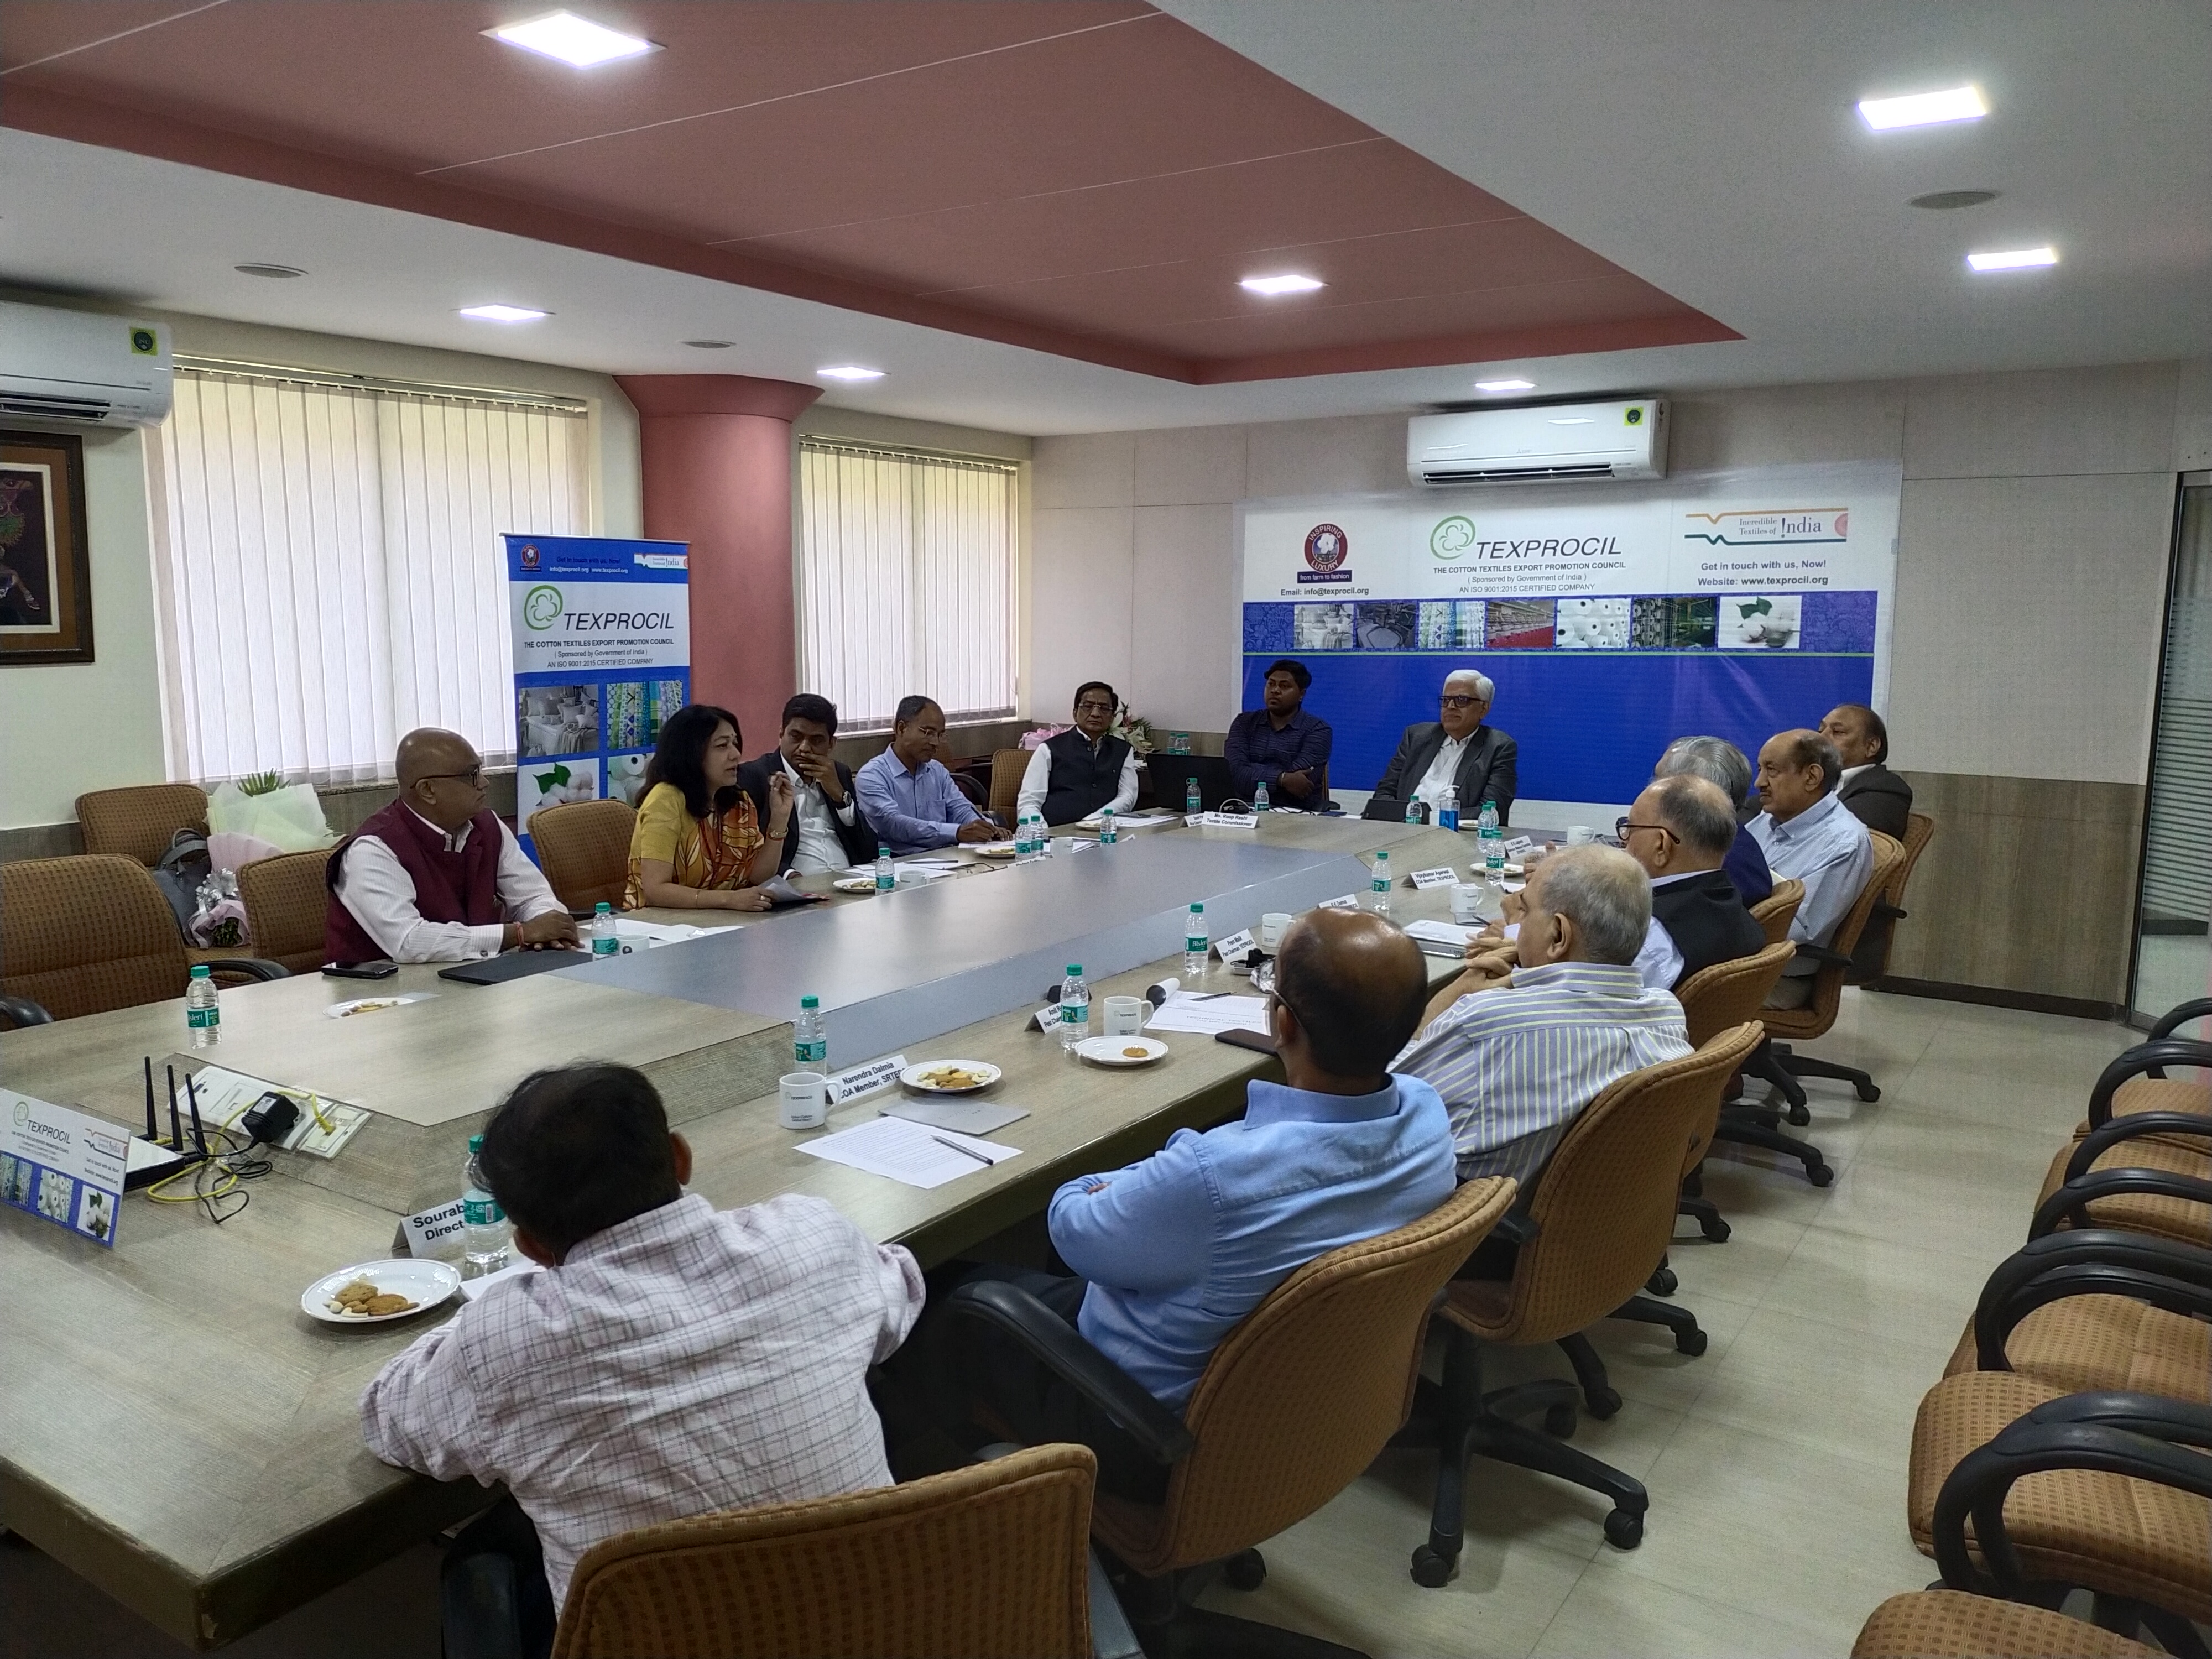 A meeting on ‘Technical Textiles and Export Strategy’ chaired by Ms. Shubhra, Trade Adviser, Ministry of Textiles was held at TEXPROCIL Head Office in Mumbai on 27th May 2022.